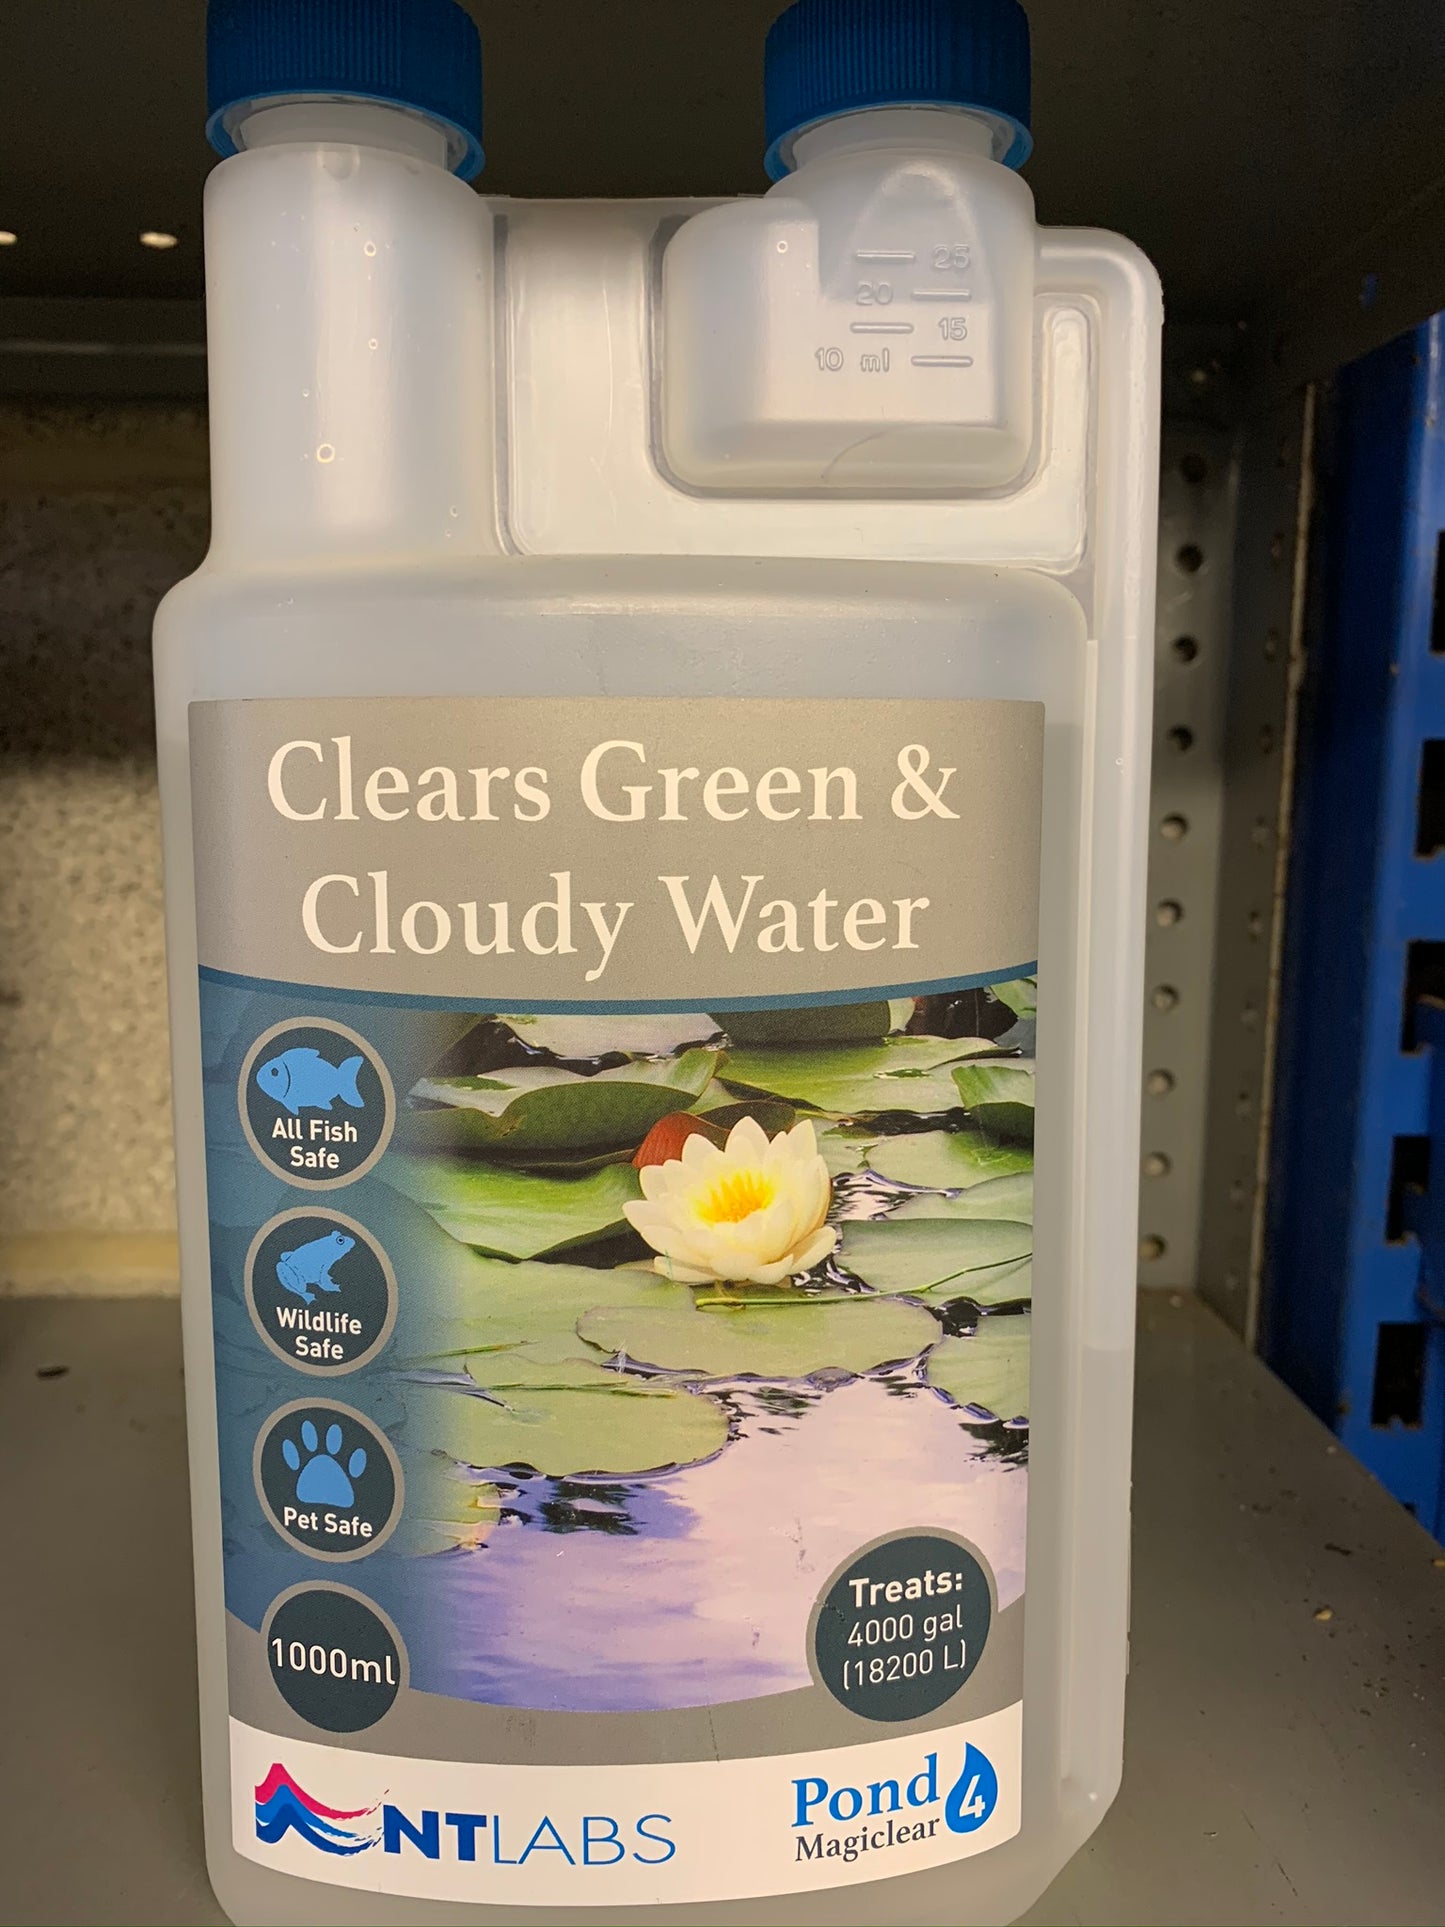 Clears Green & Cloudy Water - Pond